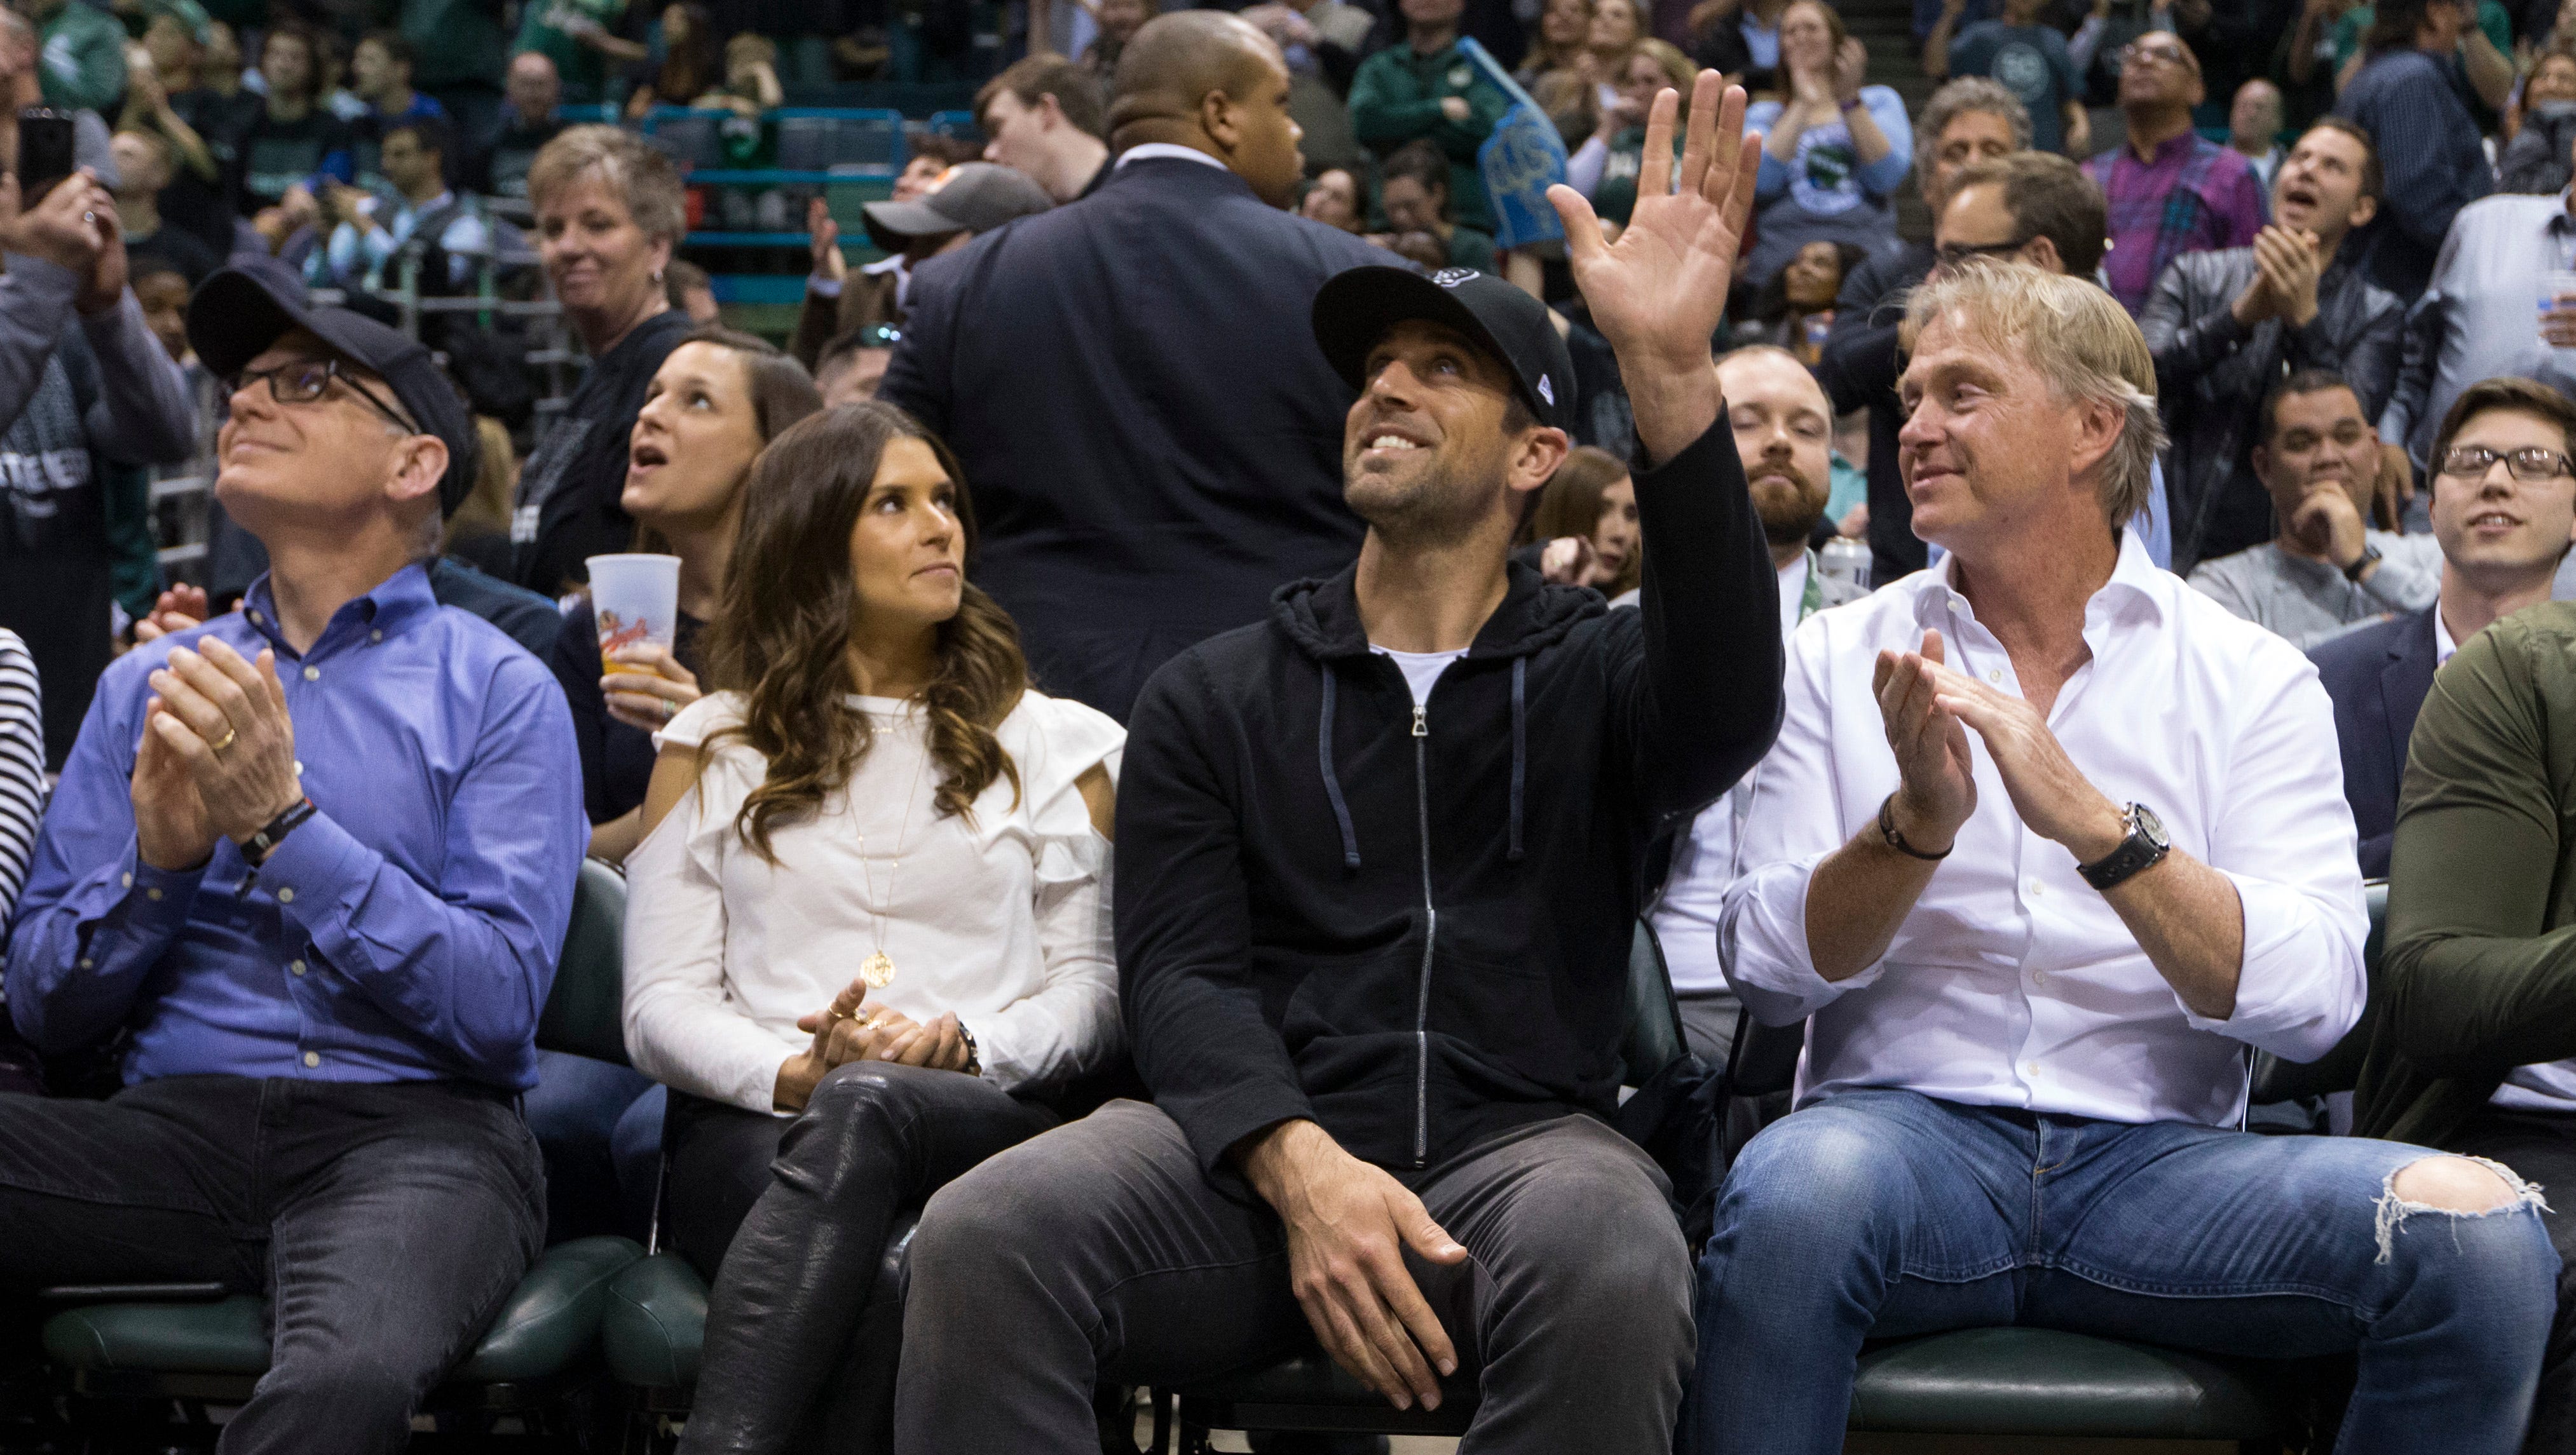 Green Bay Packers quarterback Aaron Rodgers waves to the crowd  at the BMO Harris Bradley Center while sitting next to Milwaukee Bucks owner Wes Edens after it was announced Rodgers joined the local ownership team of the Bucks during a Game 3 playoff against the Boston Celtics in Milwaukee. Next to Rodgers is race car driver Danica Patrick.